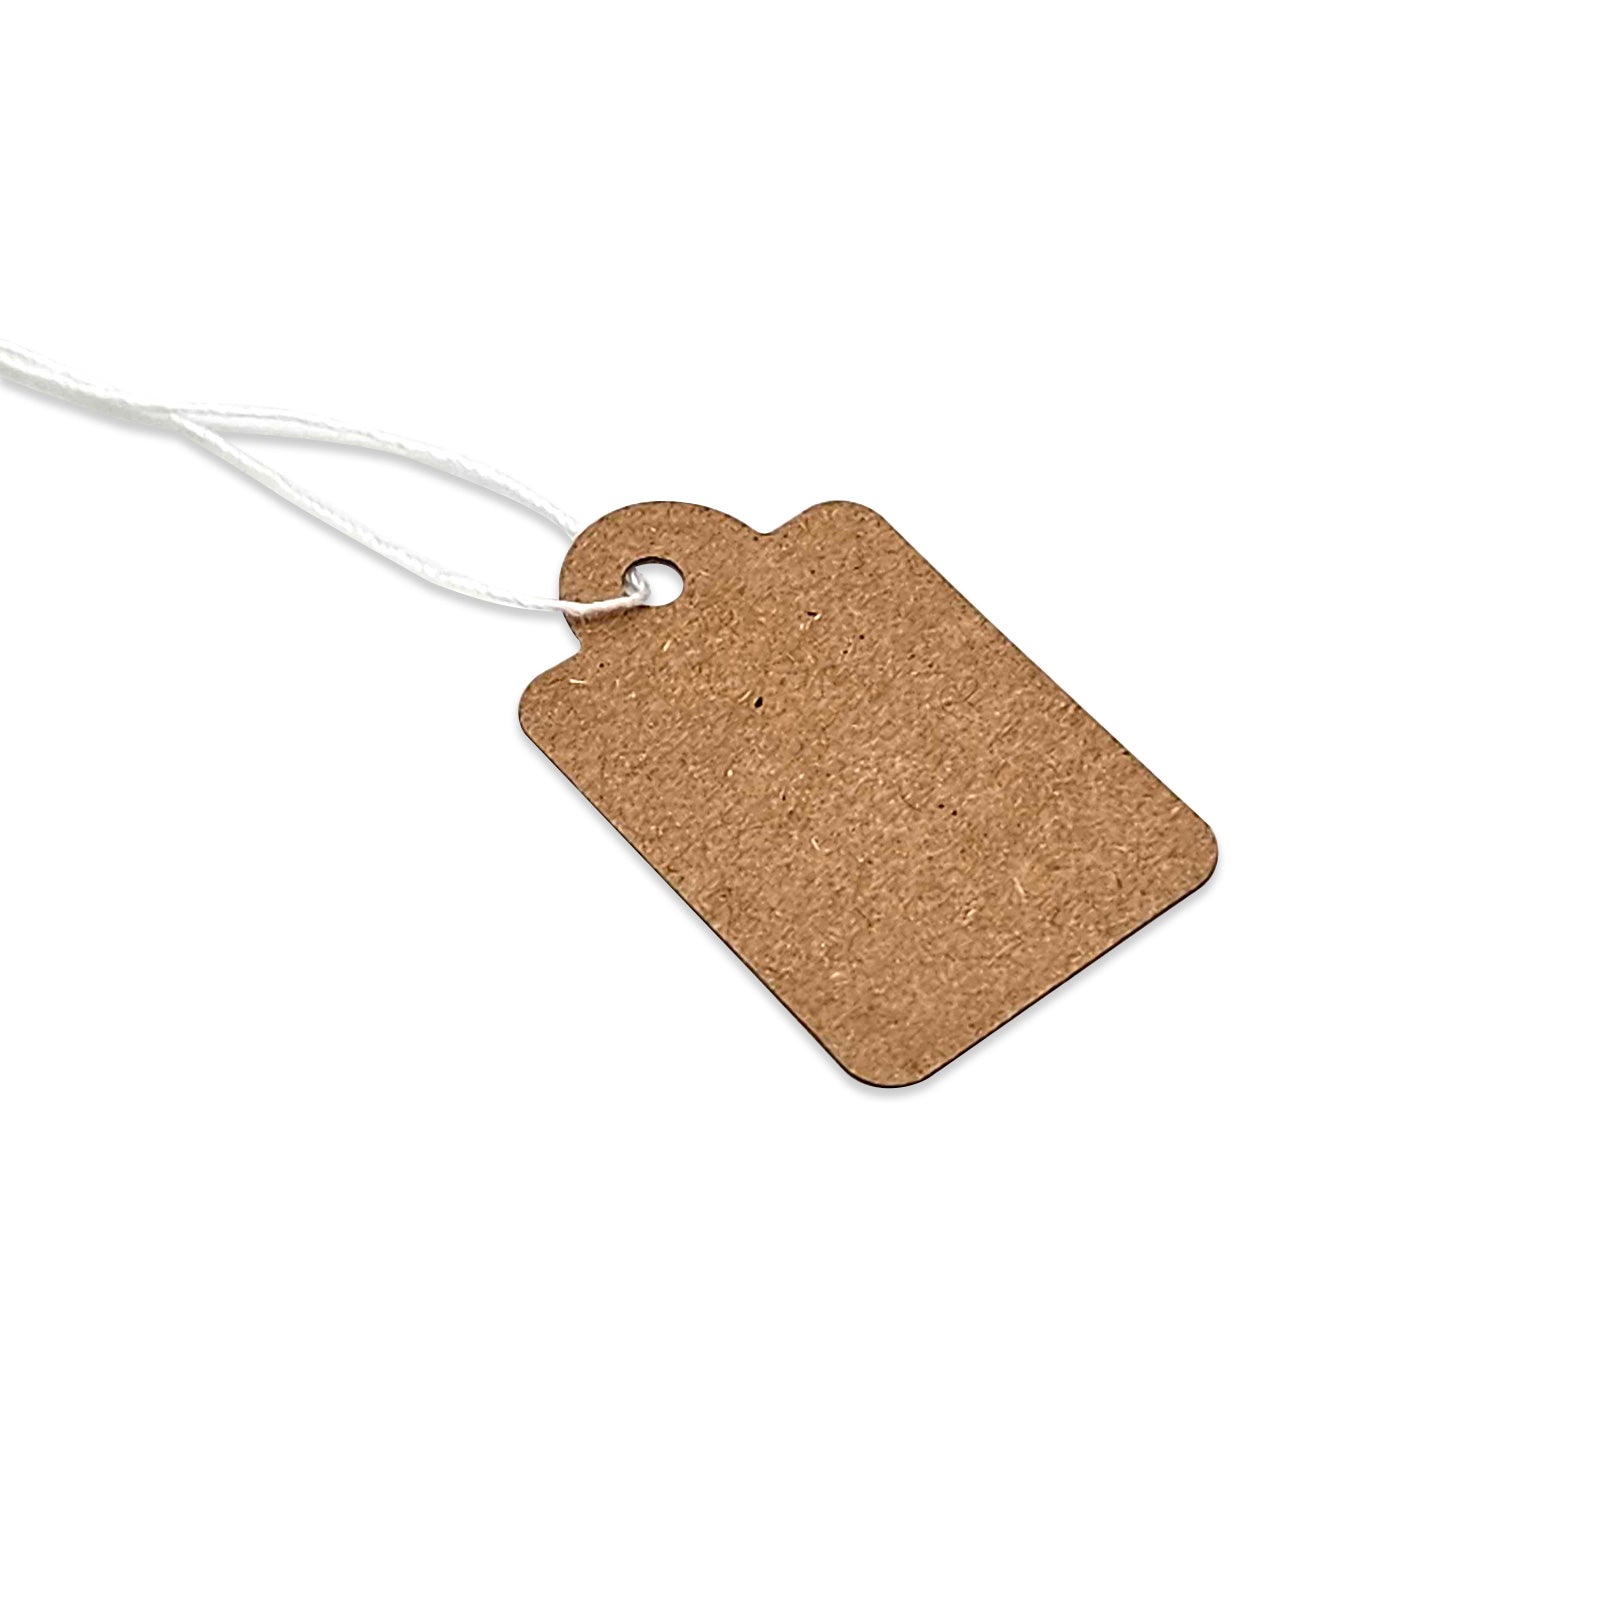 100-Pack of 22 x 35mm Kraft Paper Knotted String Price Tags – JPI Display